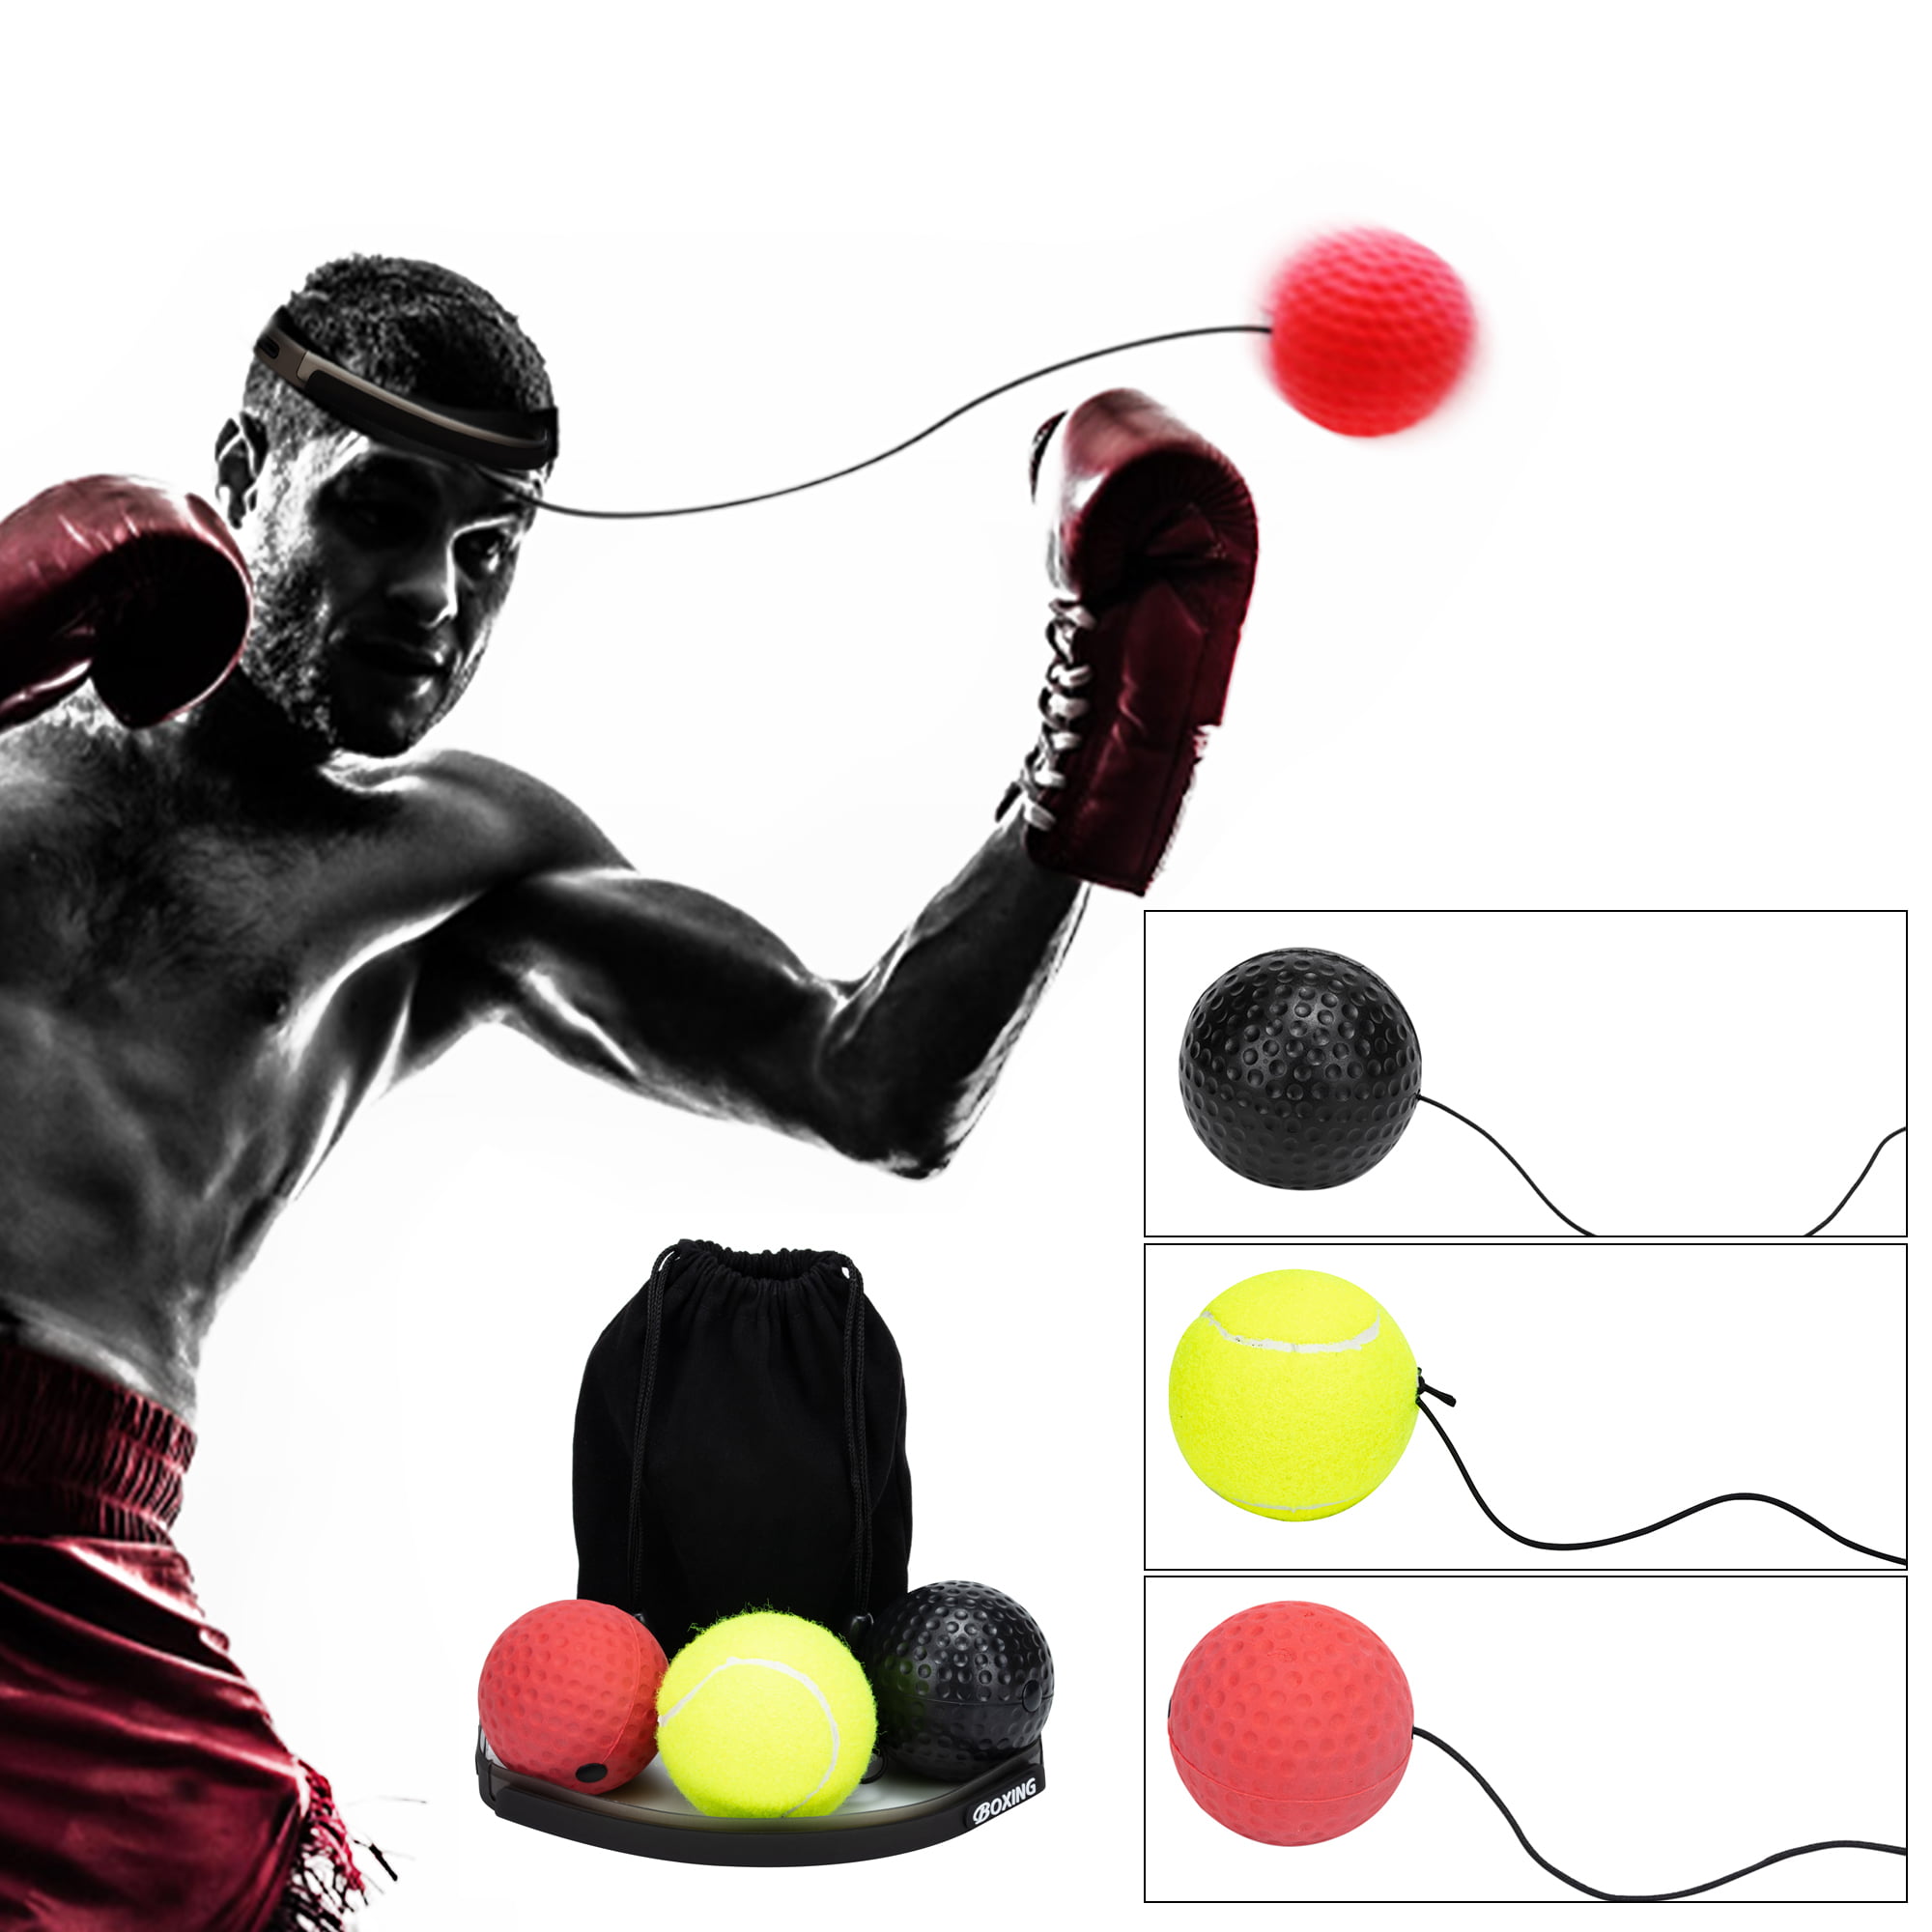 Boxing Punch Exercise Fight Ball Reflex Boxer REACT Speed Training Head Band Box